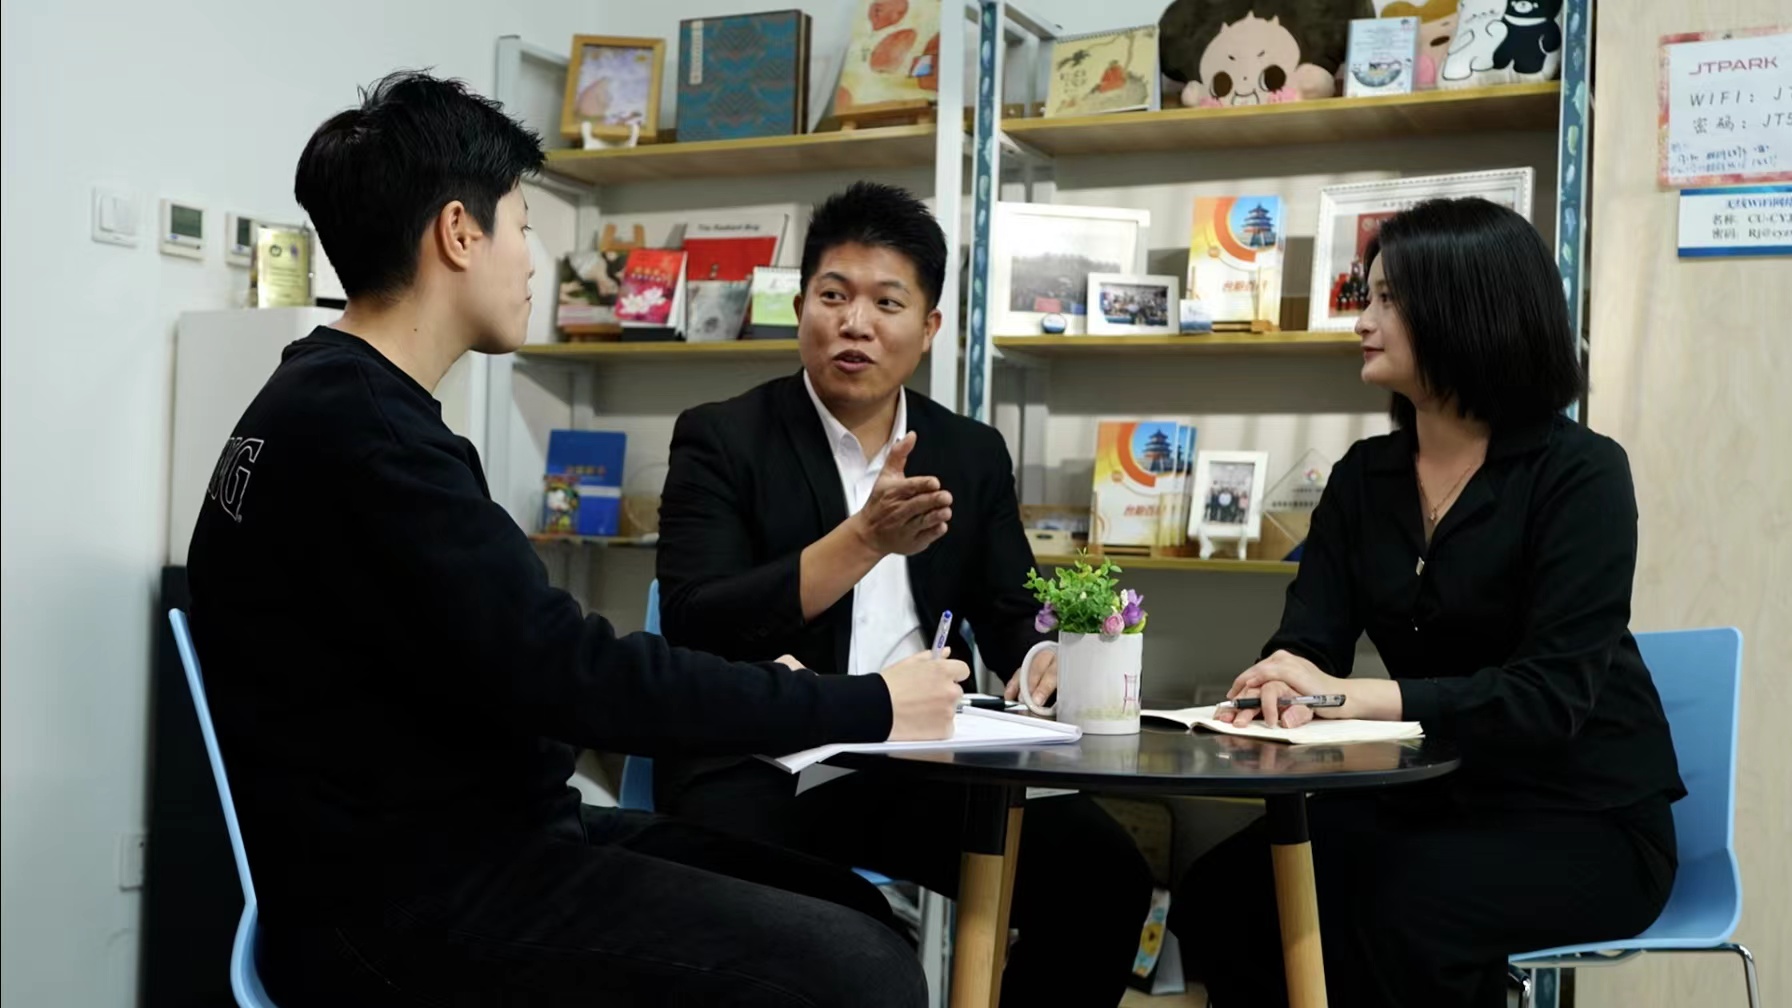 Chen Wencheng talks with other young people from Taiwan in a meeting, November 12, 2022. /CGTN